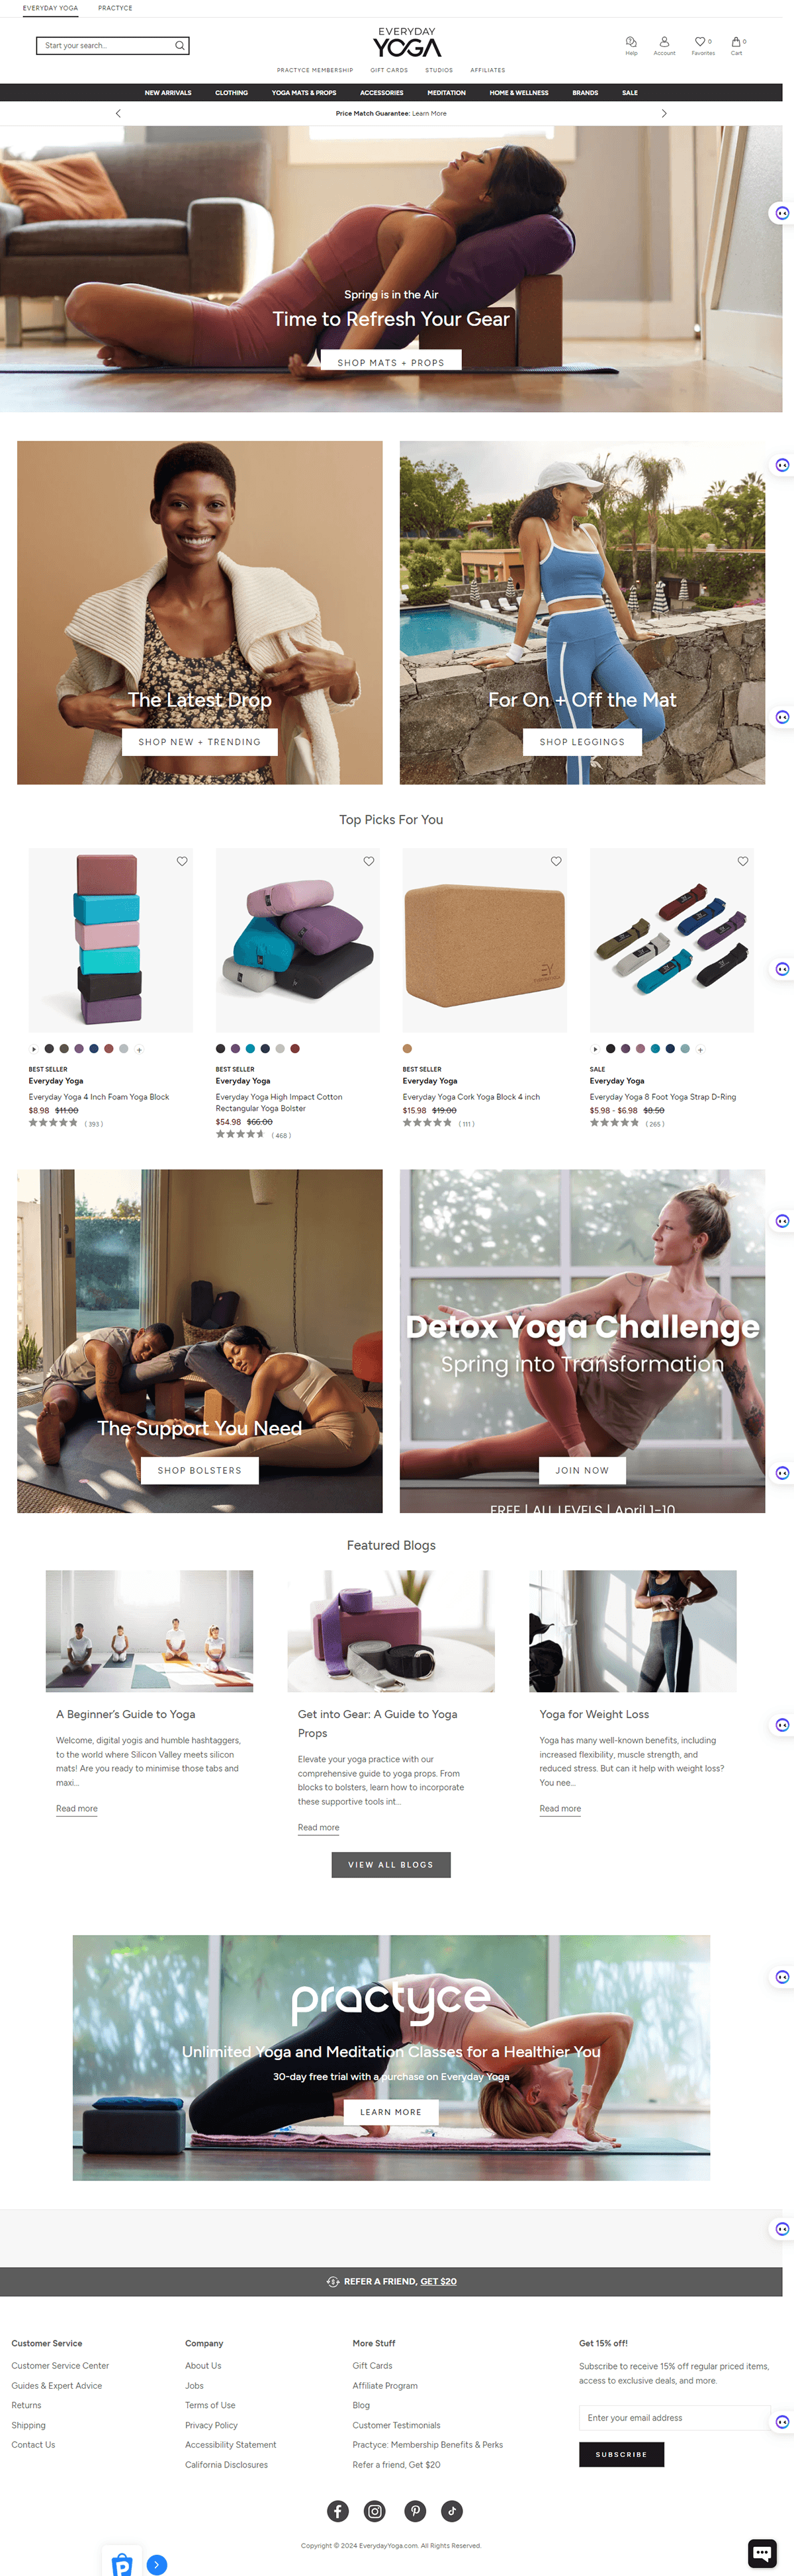 shopify store design Shopify website dropshipping store Theme Customization Sales Page Design shopify store shopify theme customize Shopify dropshipping landing page shopify website redesign